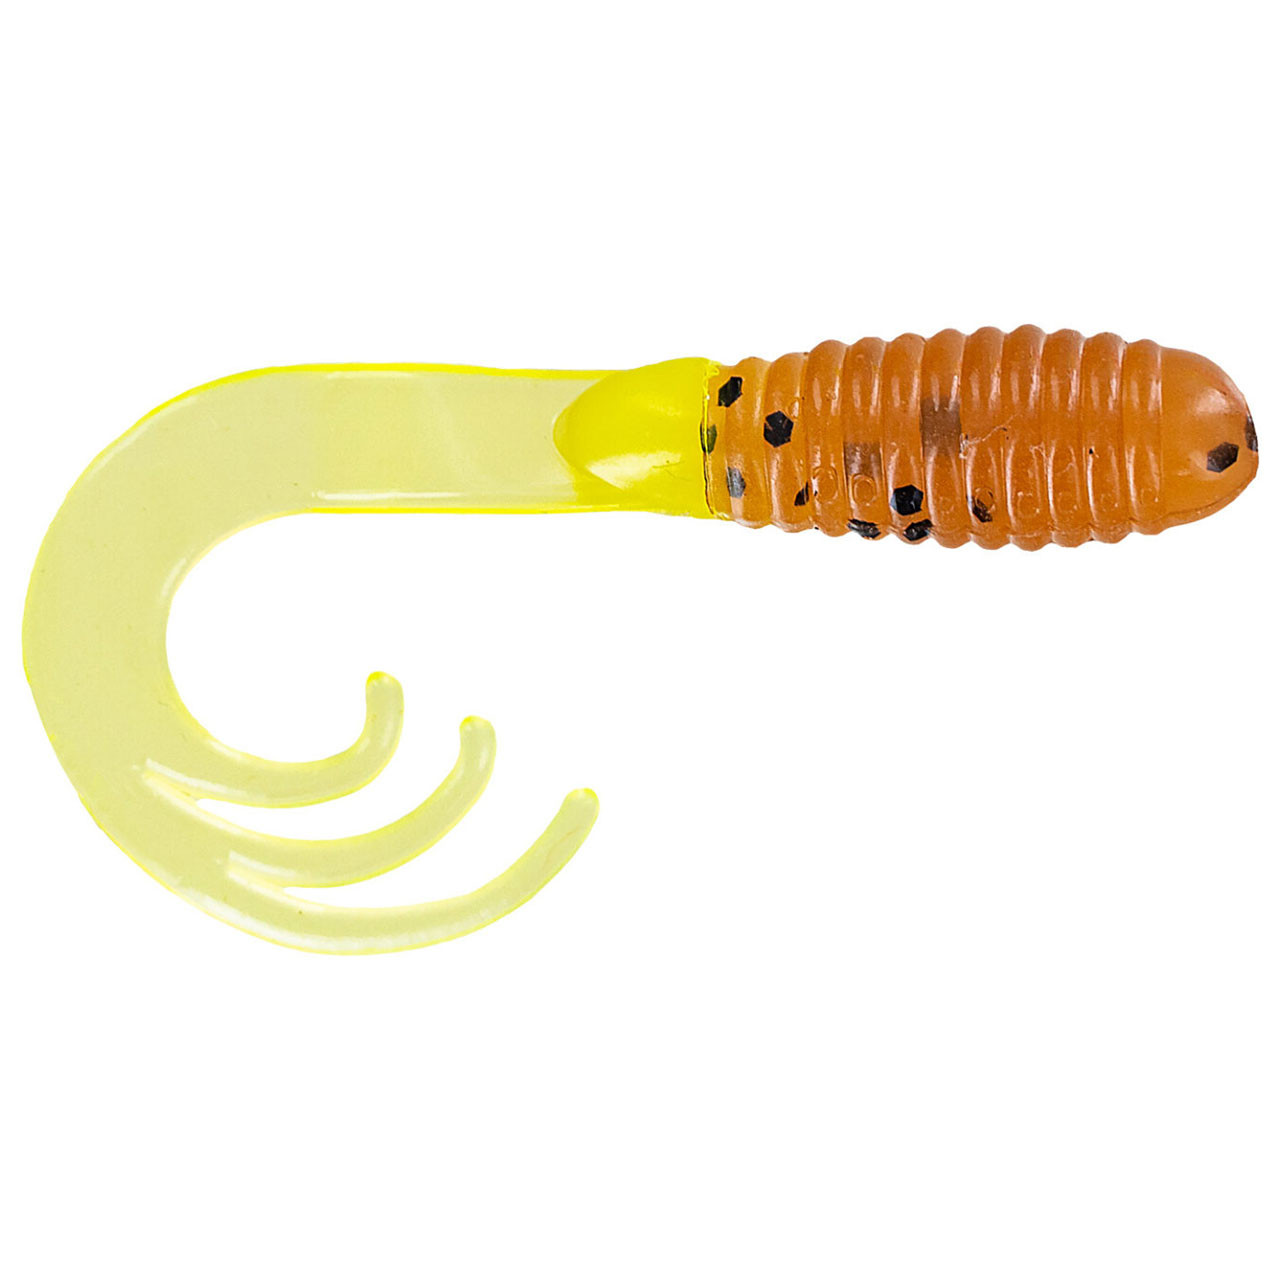 Soft Plastic Lures 2'' Crappie Tubes 50 PK GRUB Lure JIG Fishing SHAD Glow  Green Chartreuse FISHING LURES BAITS